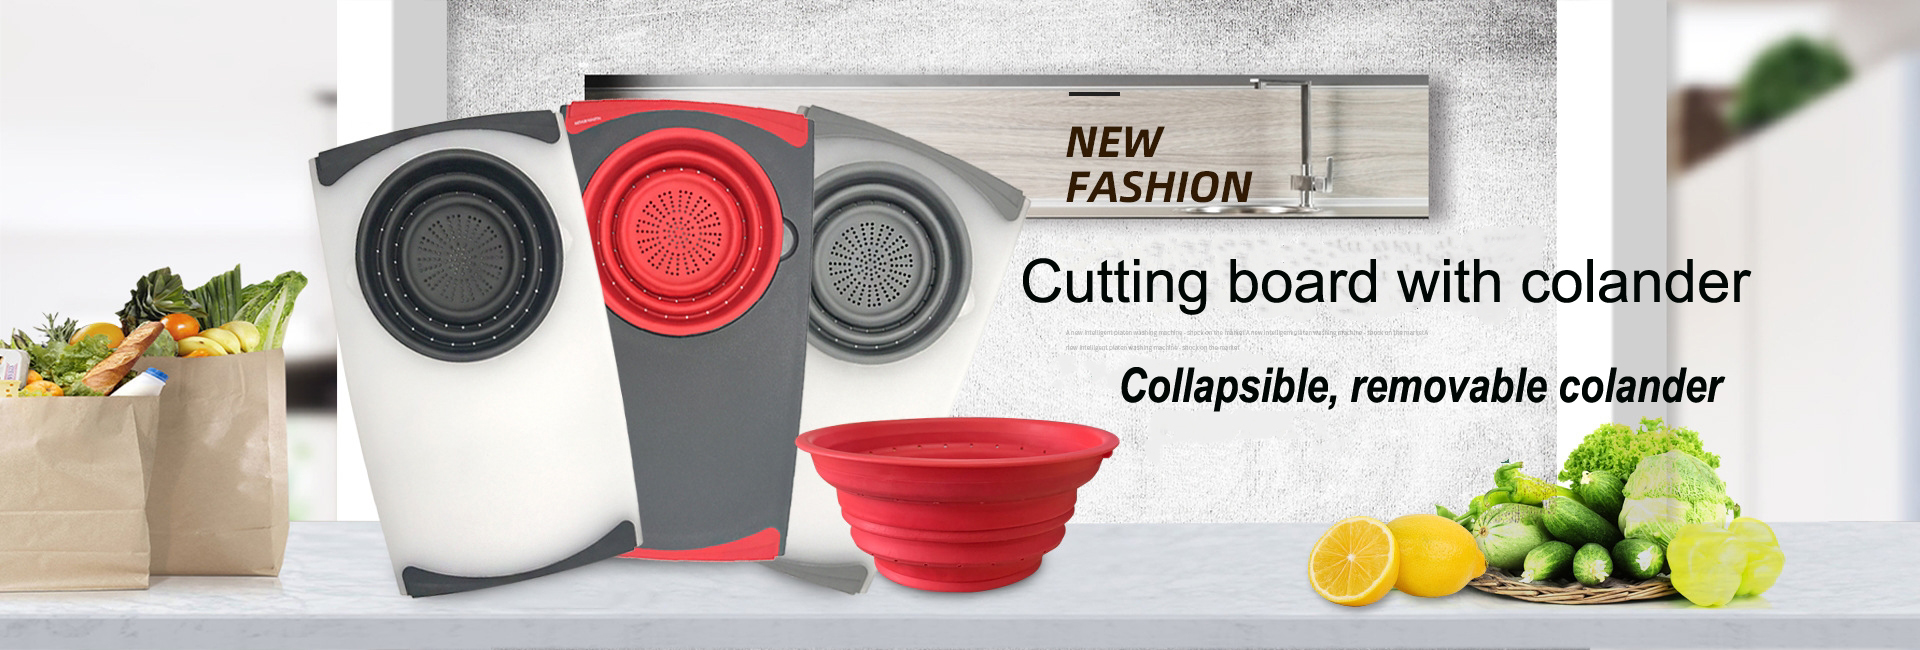 Cutting board with colander